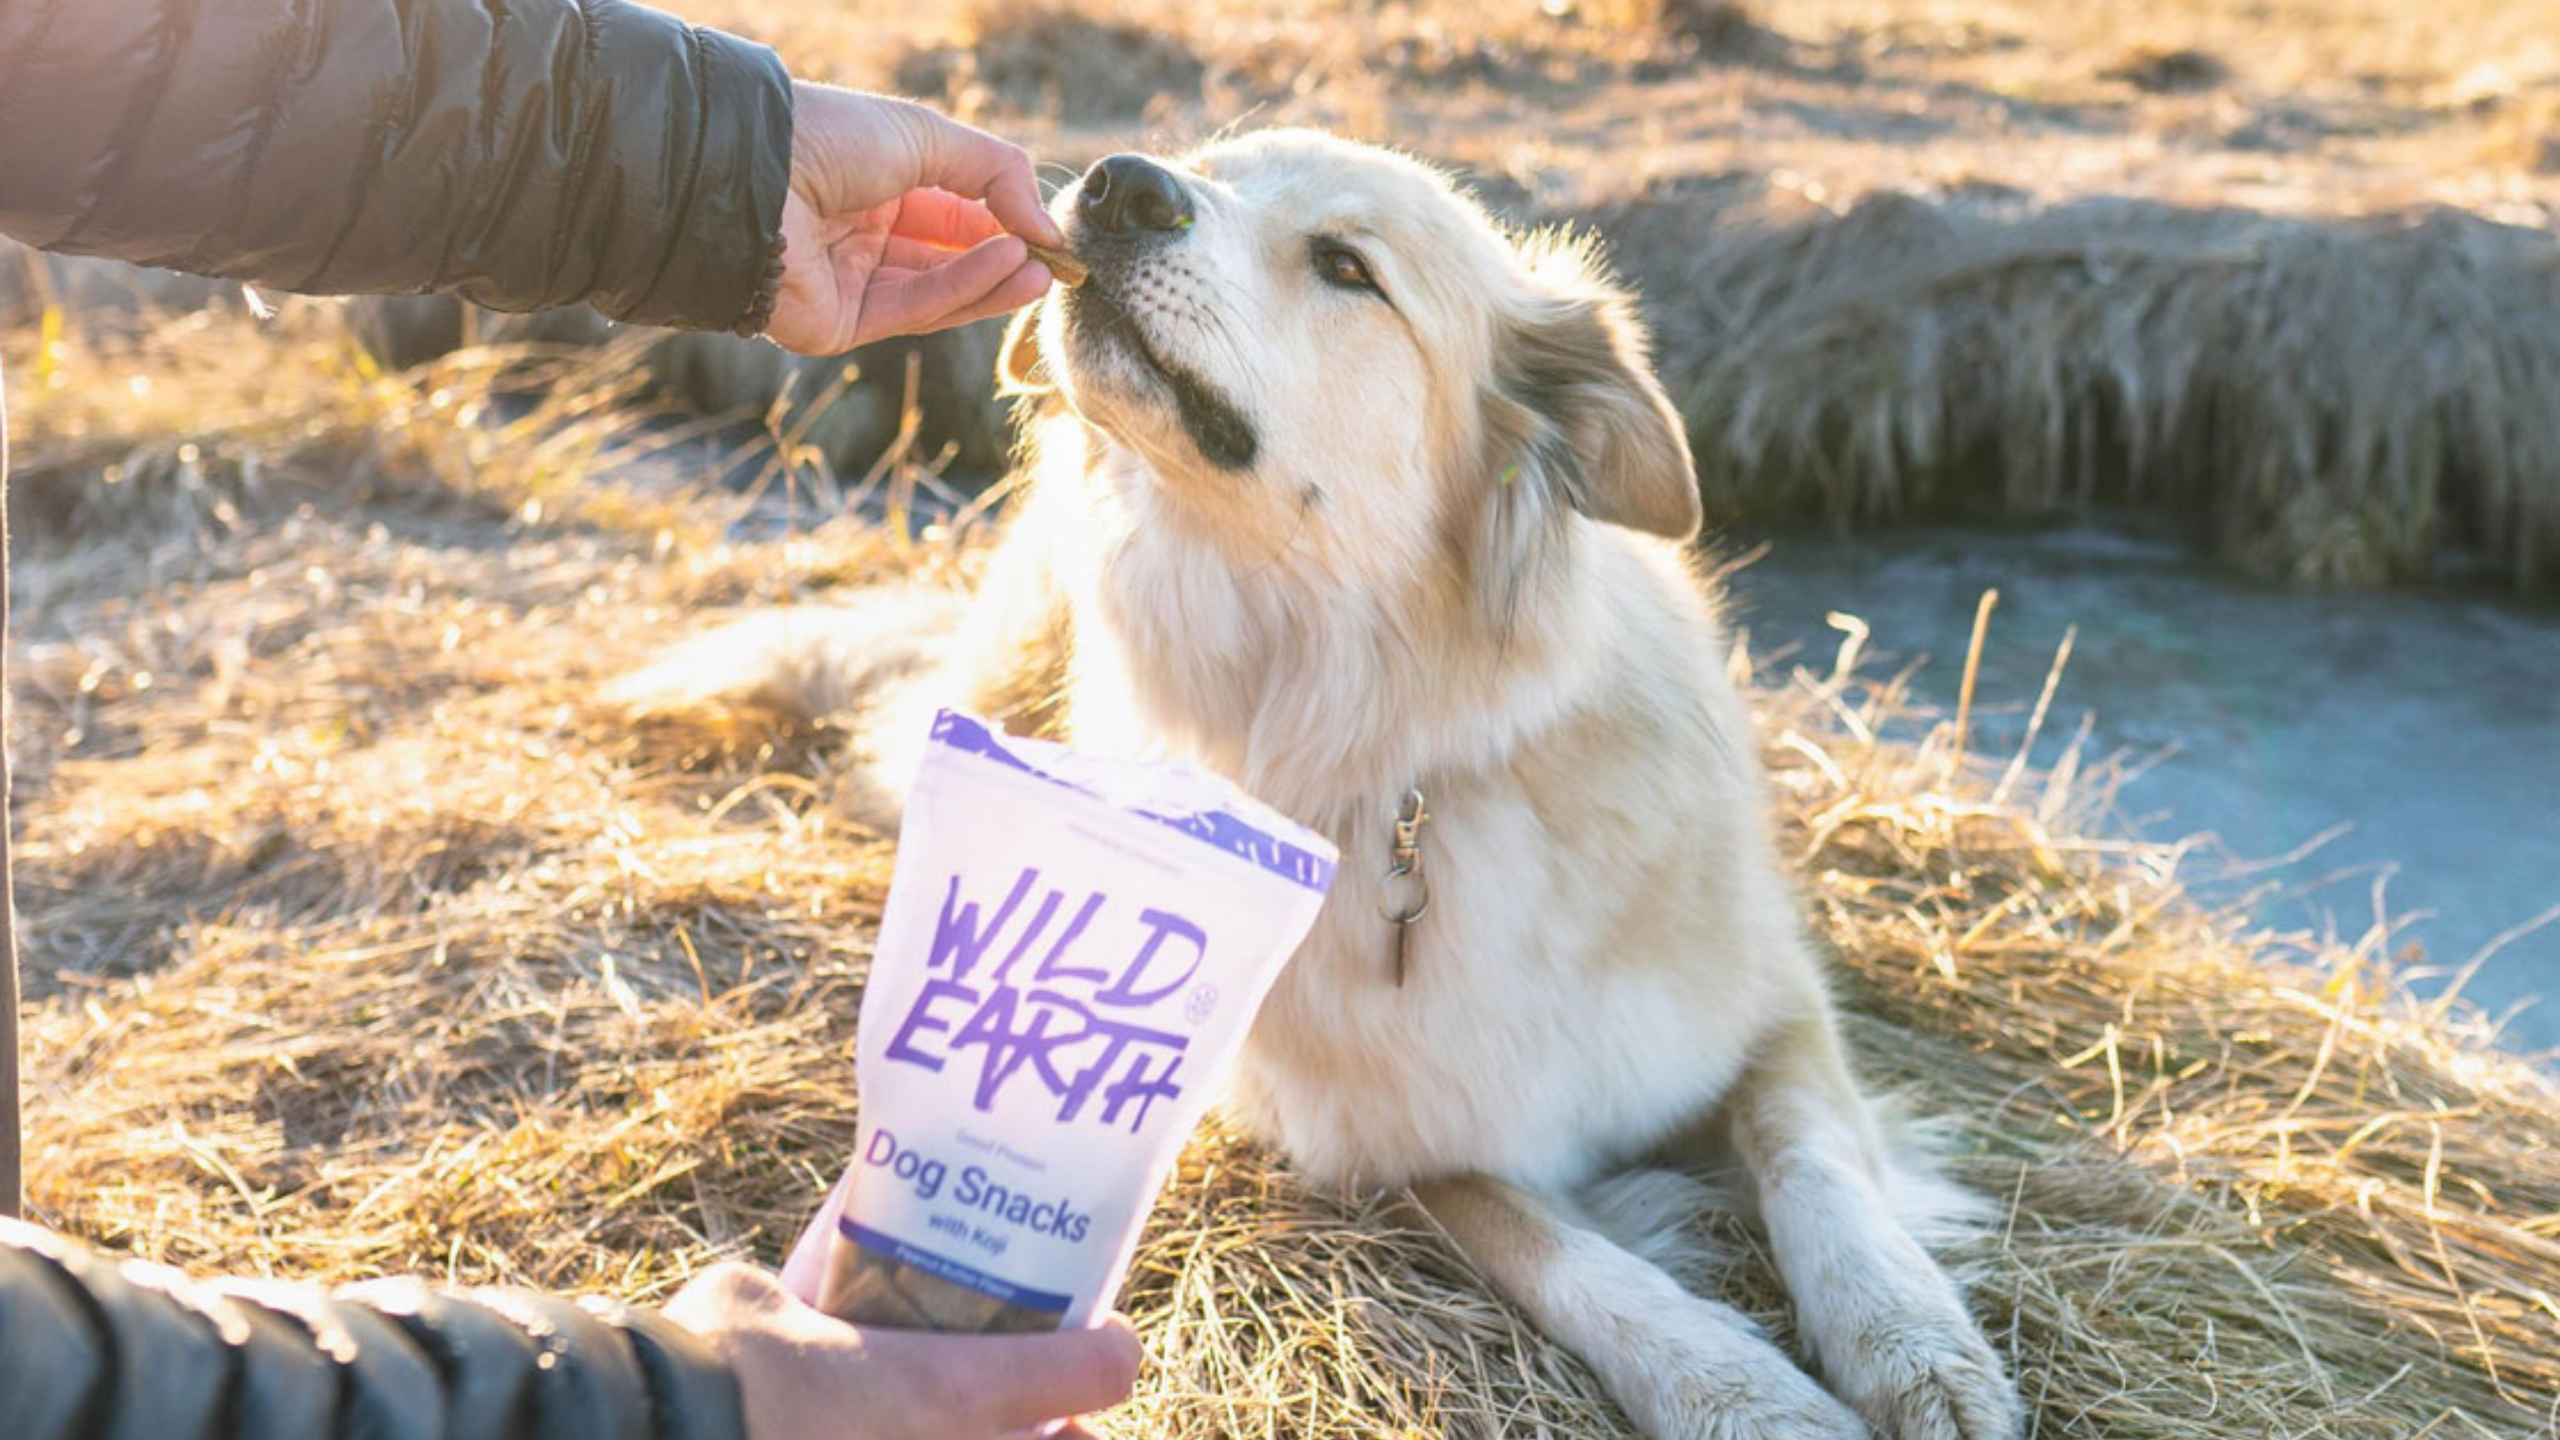 Best Vegan Dog Food? Wild Earth Has 2,000 Positive Reviews Here's Why